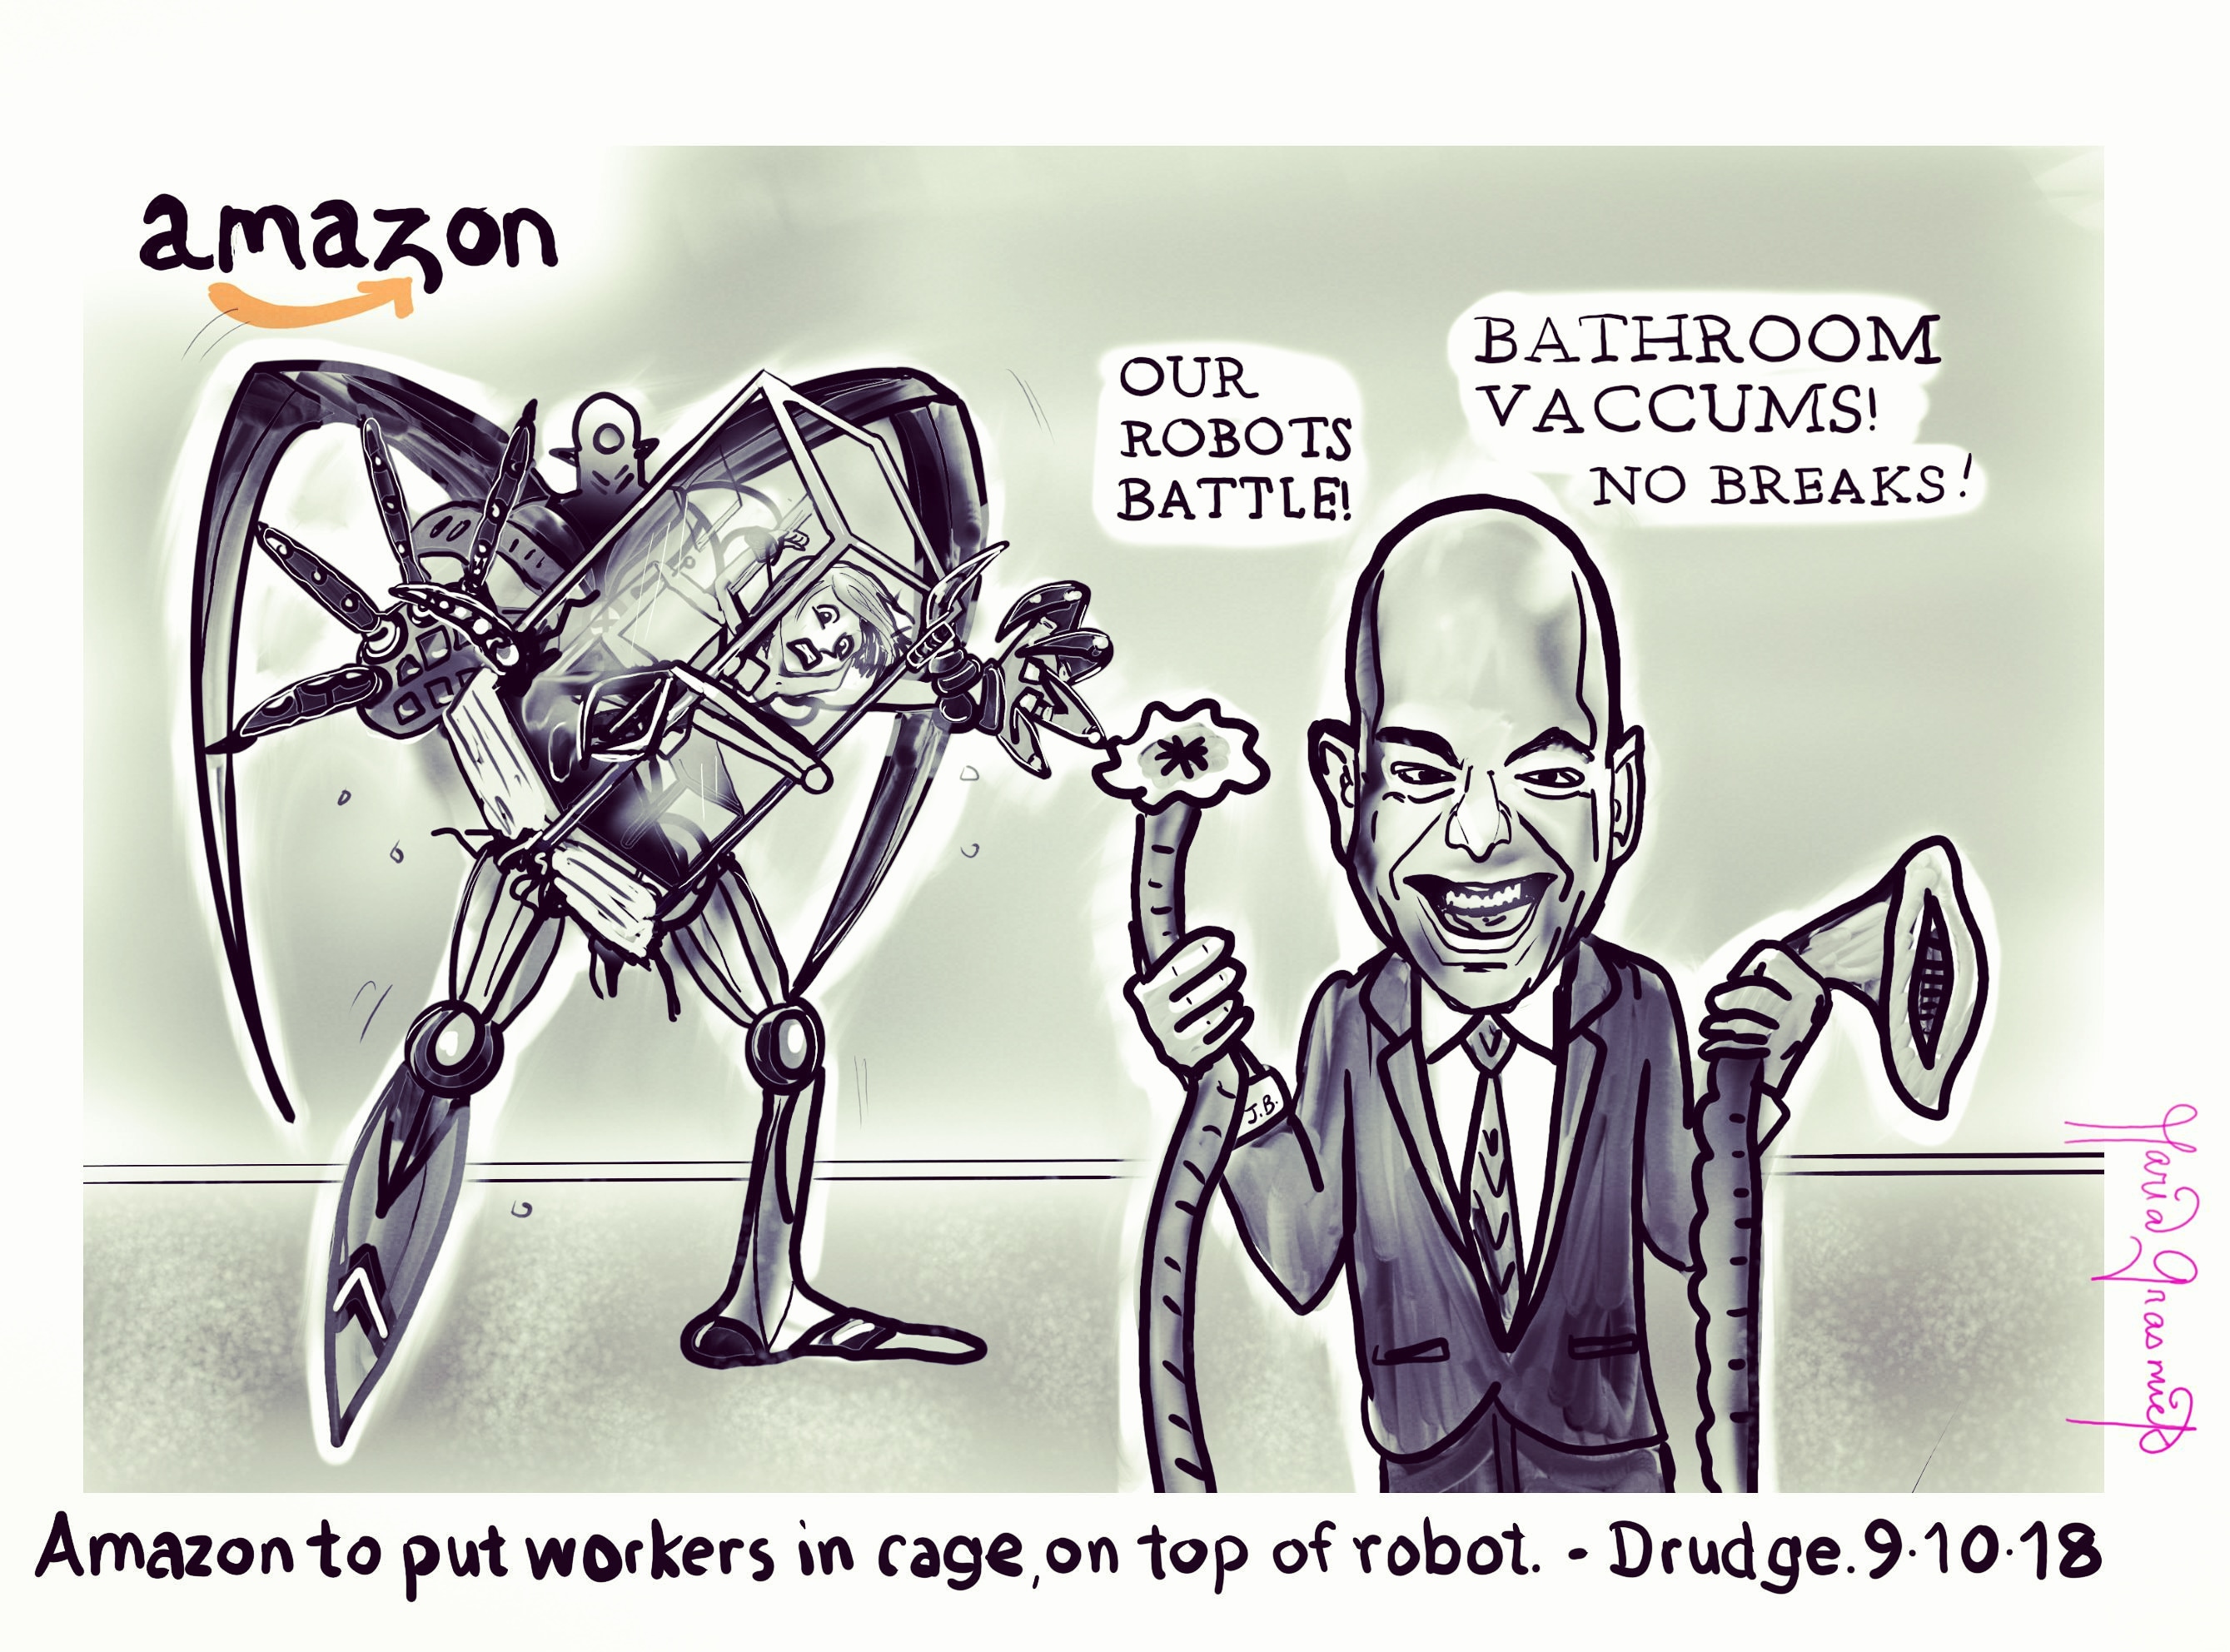 Amazon Jeff Bezos to put workers in cages on top of robot. #politicalcartoon 🐶🦁🐗🐂🐅 post thumbnail image